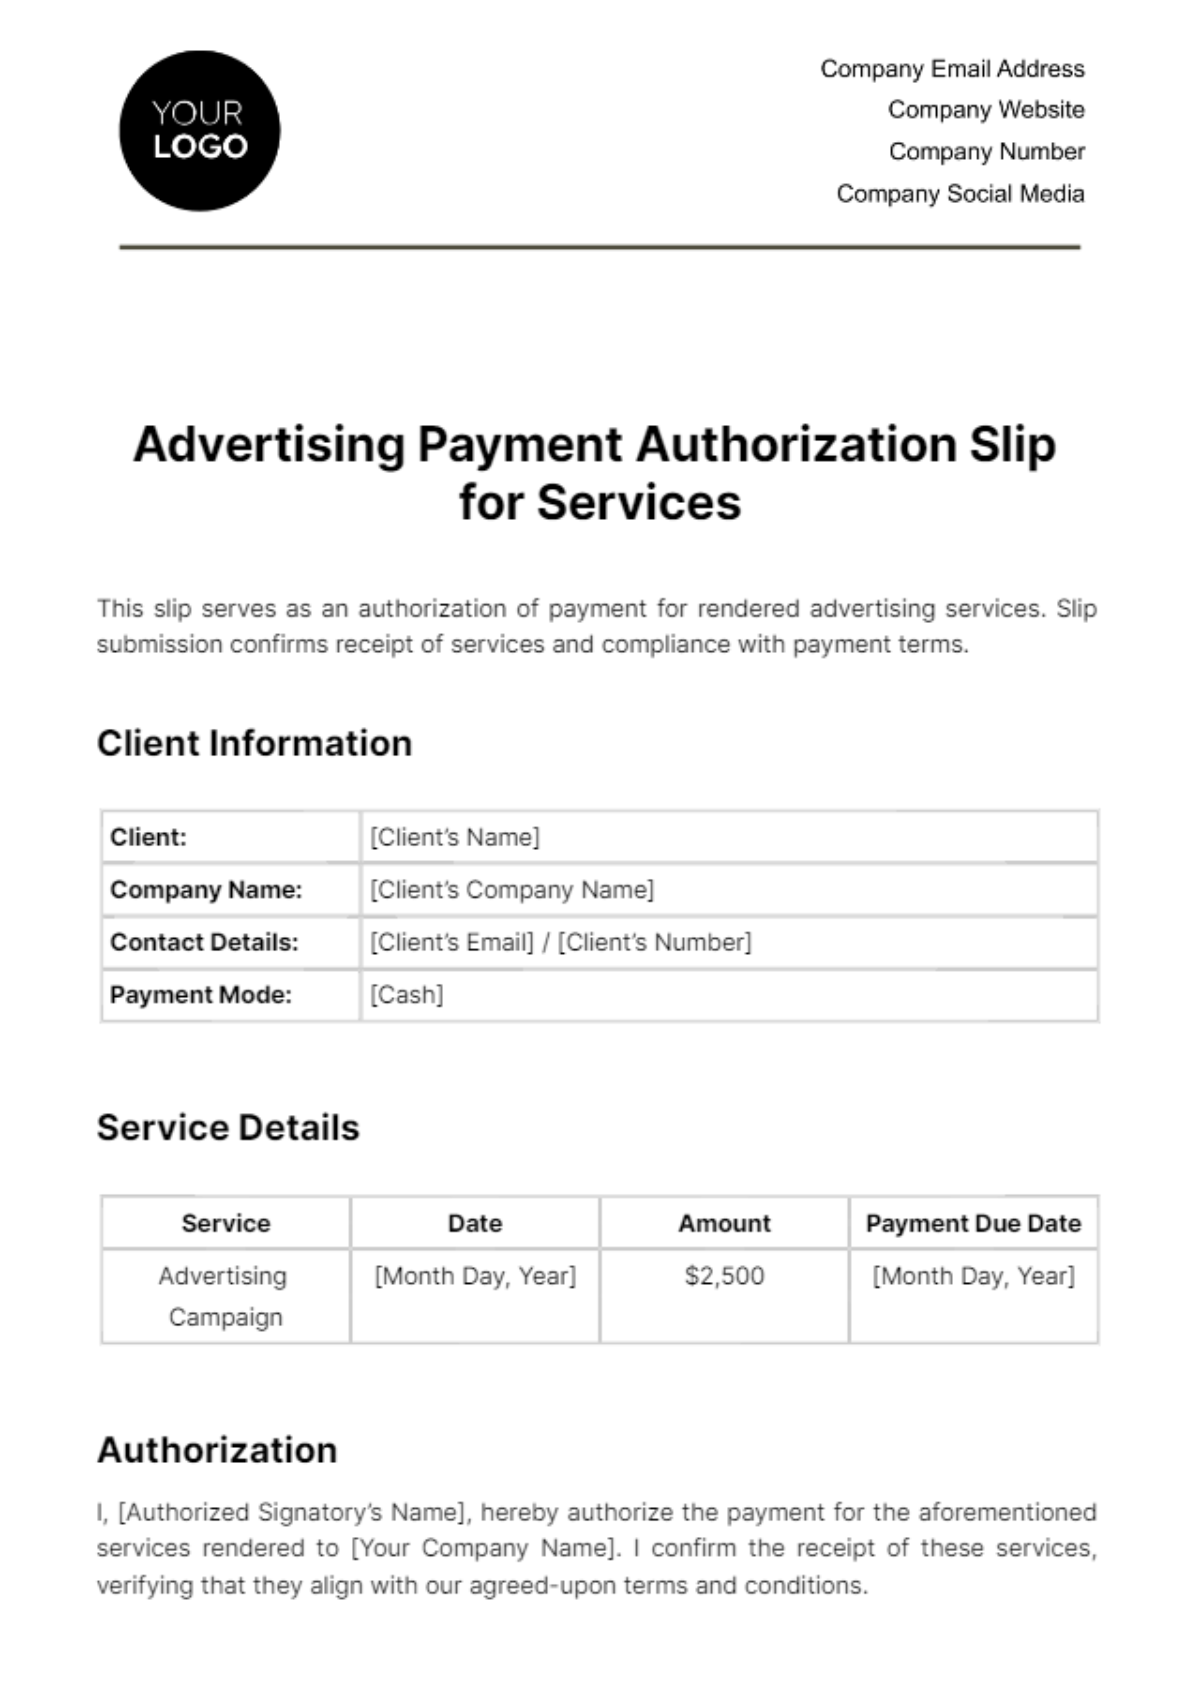 Advertising Payment Authorization Slip for Services Template